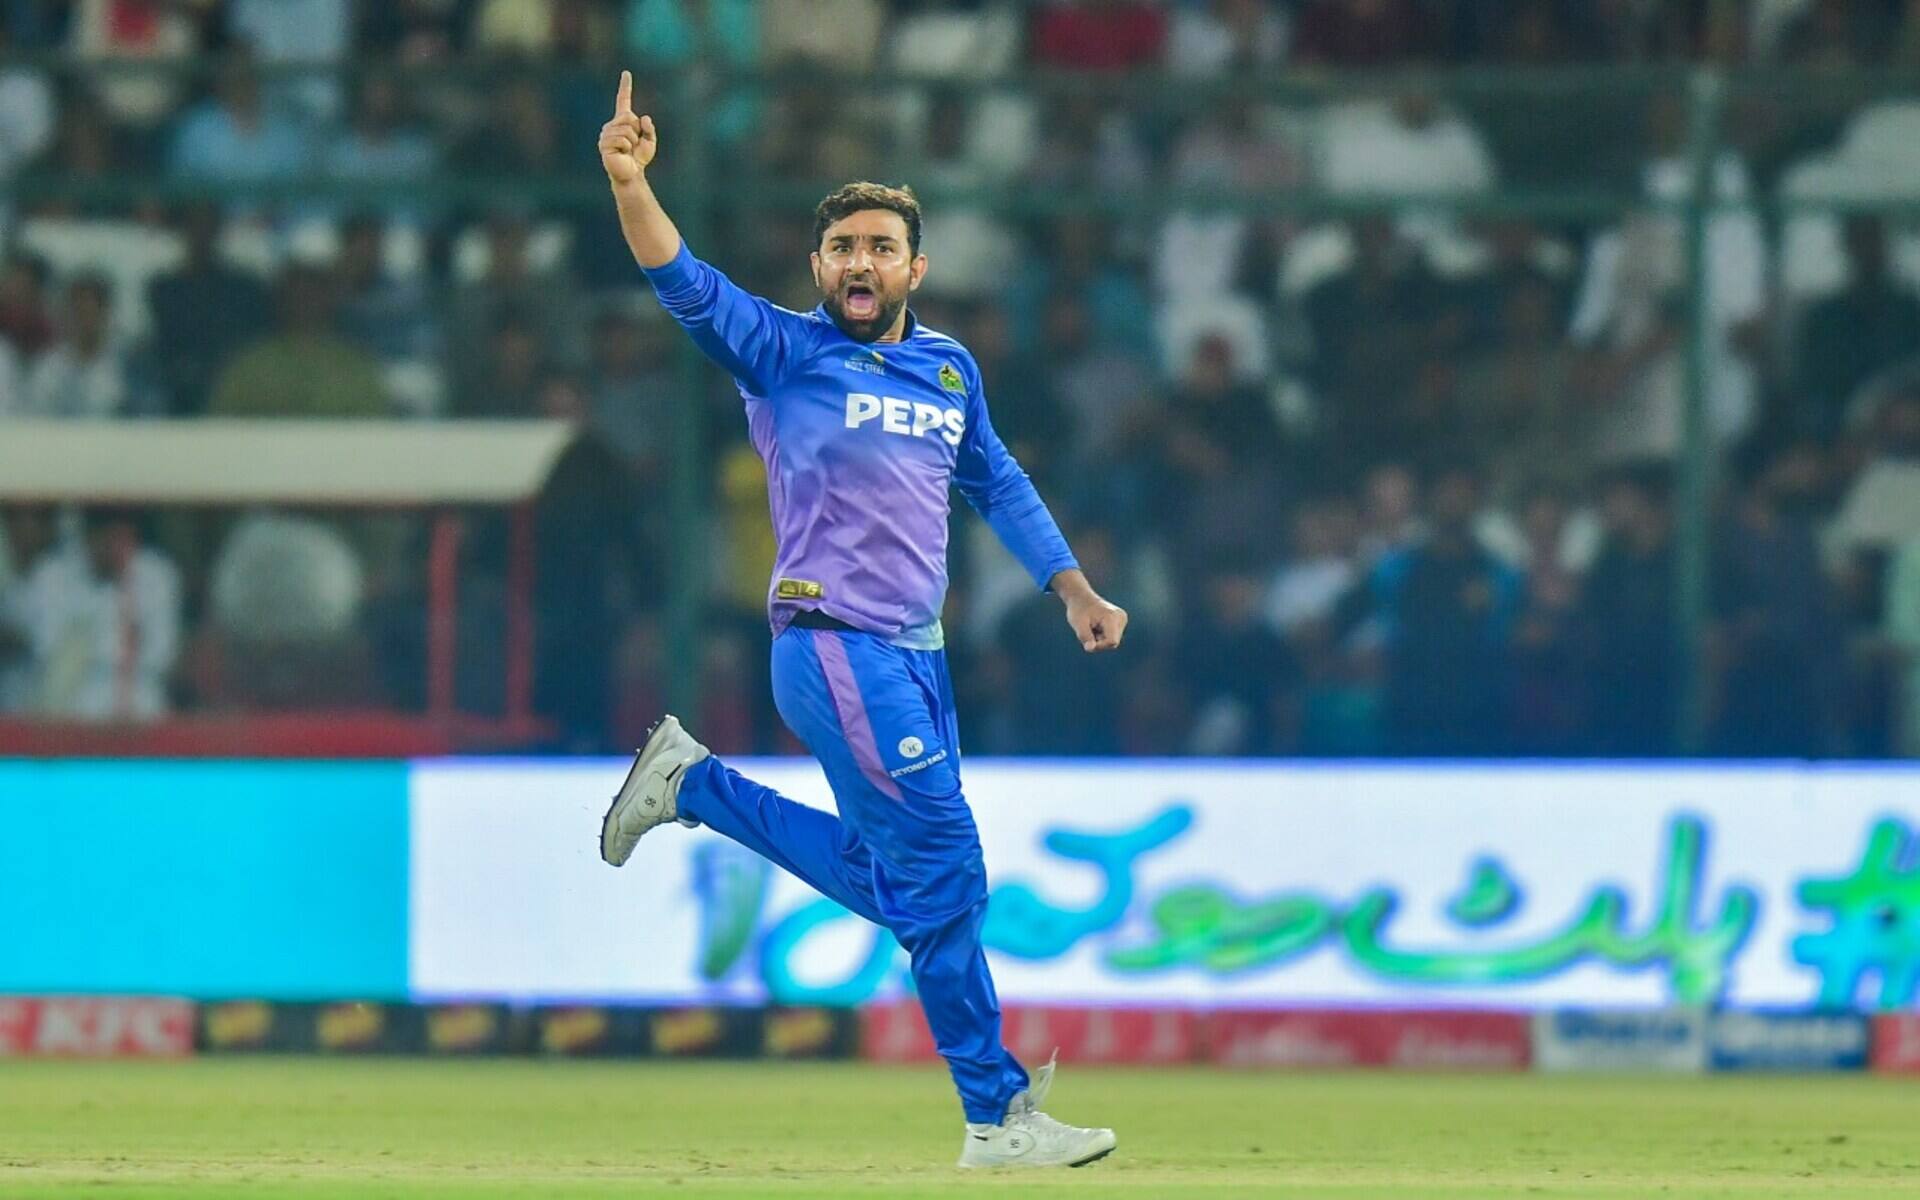 Iftikhar Ahmed has been brilliant with the ball (Source: PSL)